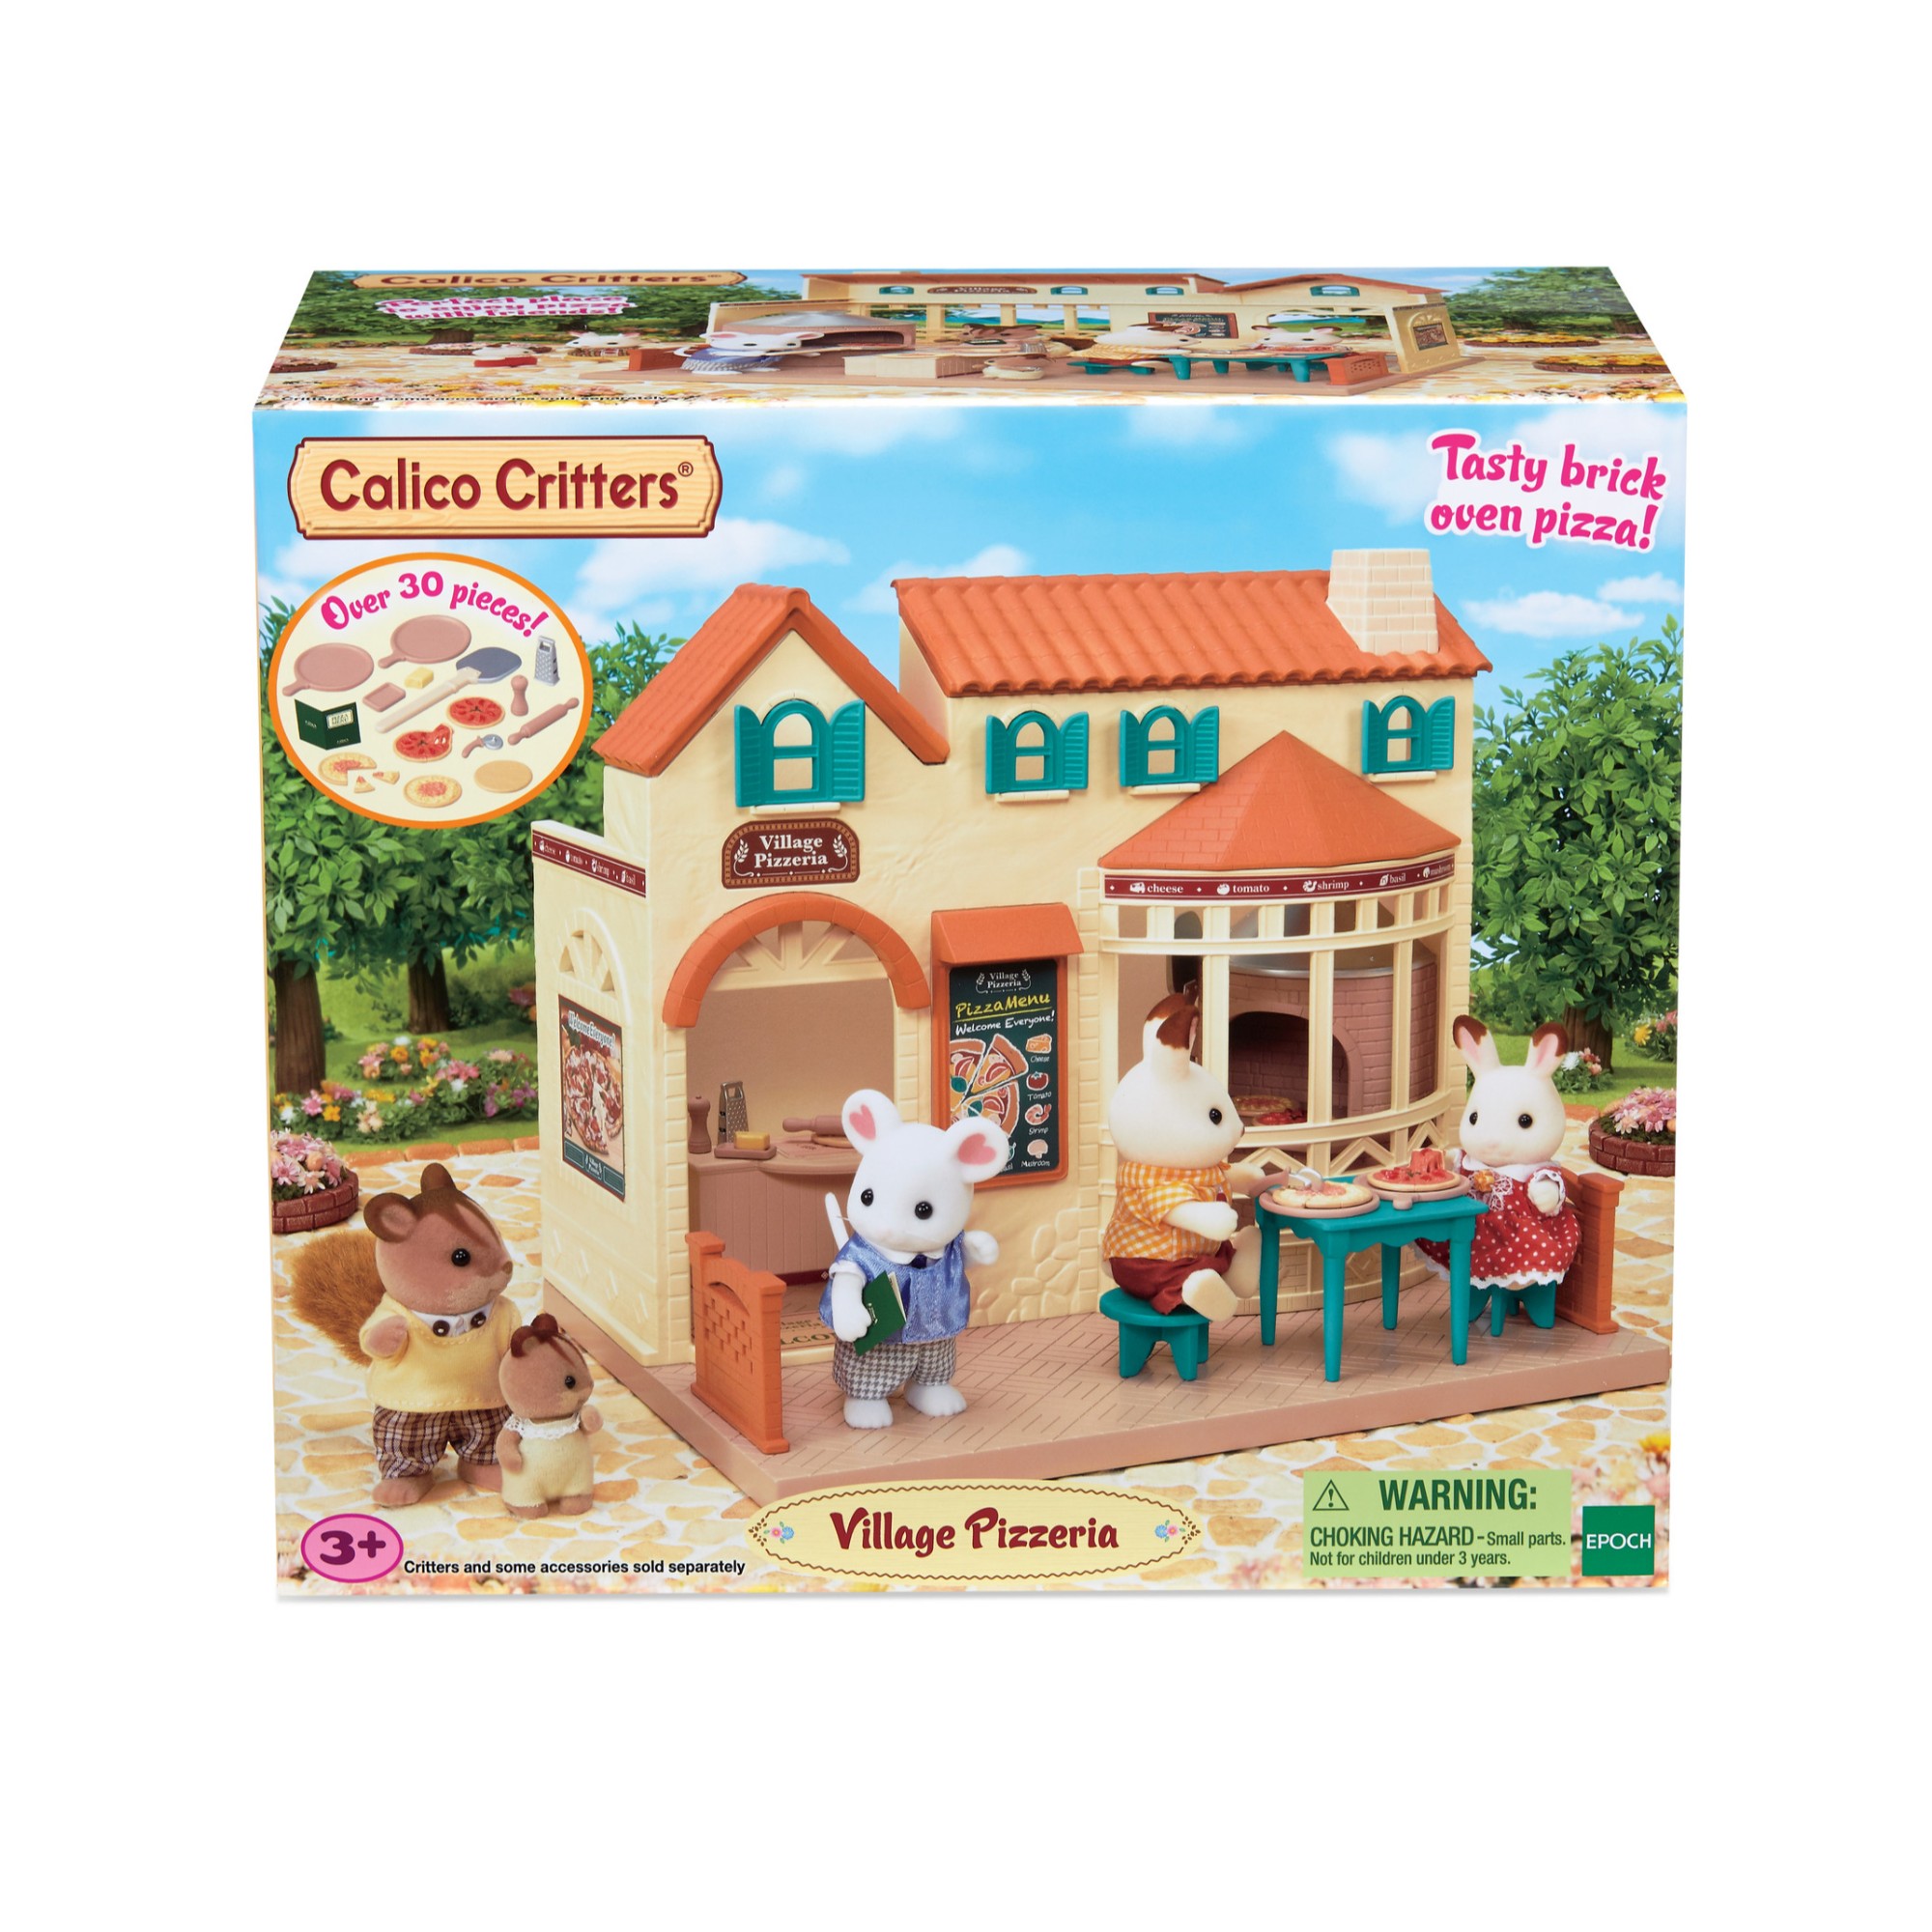 Calico Critters Village Pizzeria Dollhouse Playset, Collectible Dollhouse Toy with Furniture and Accessories Included - image 2 of 3